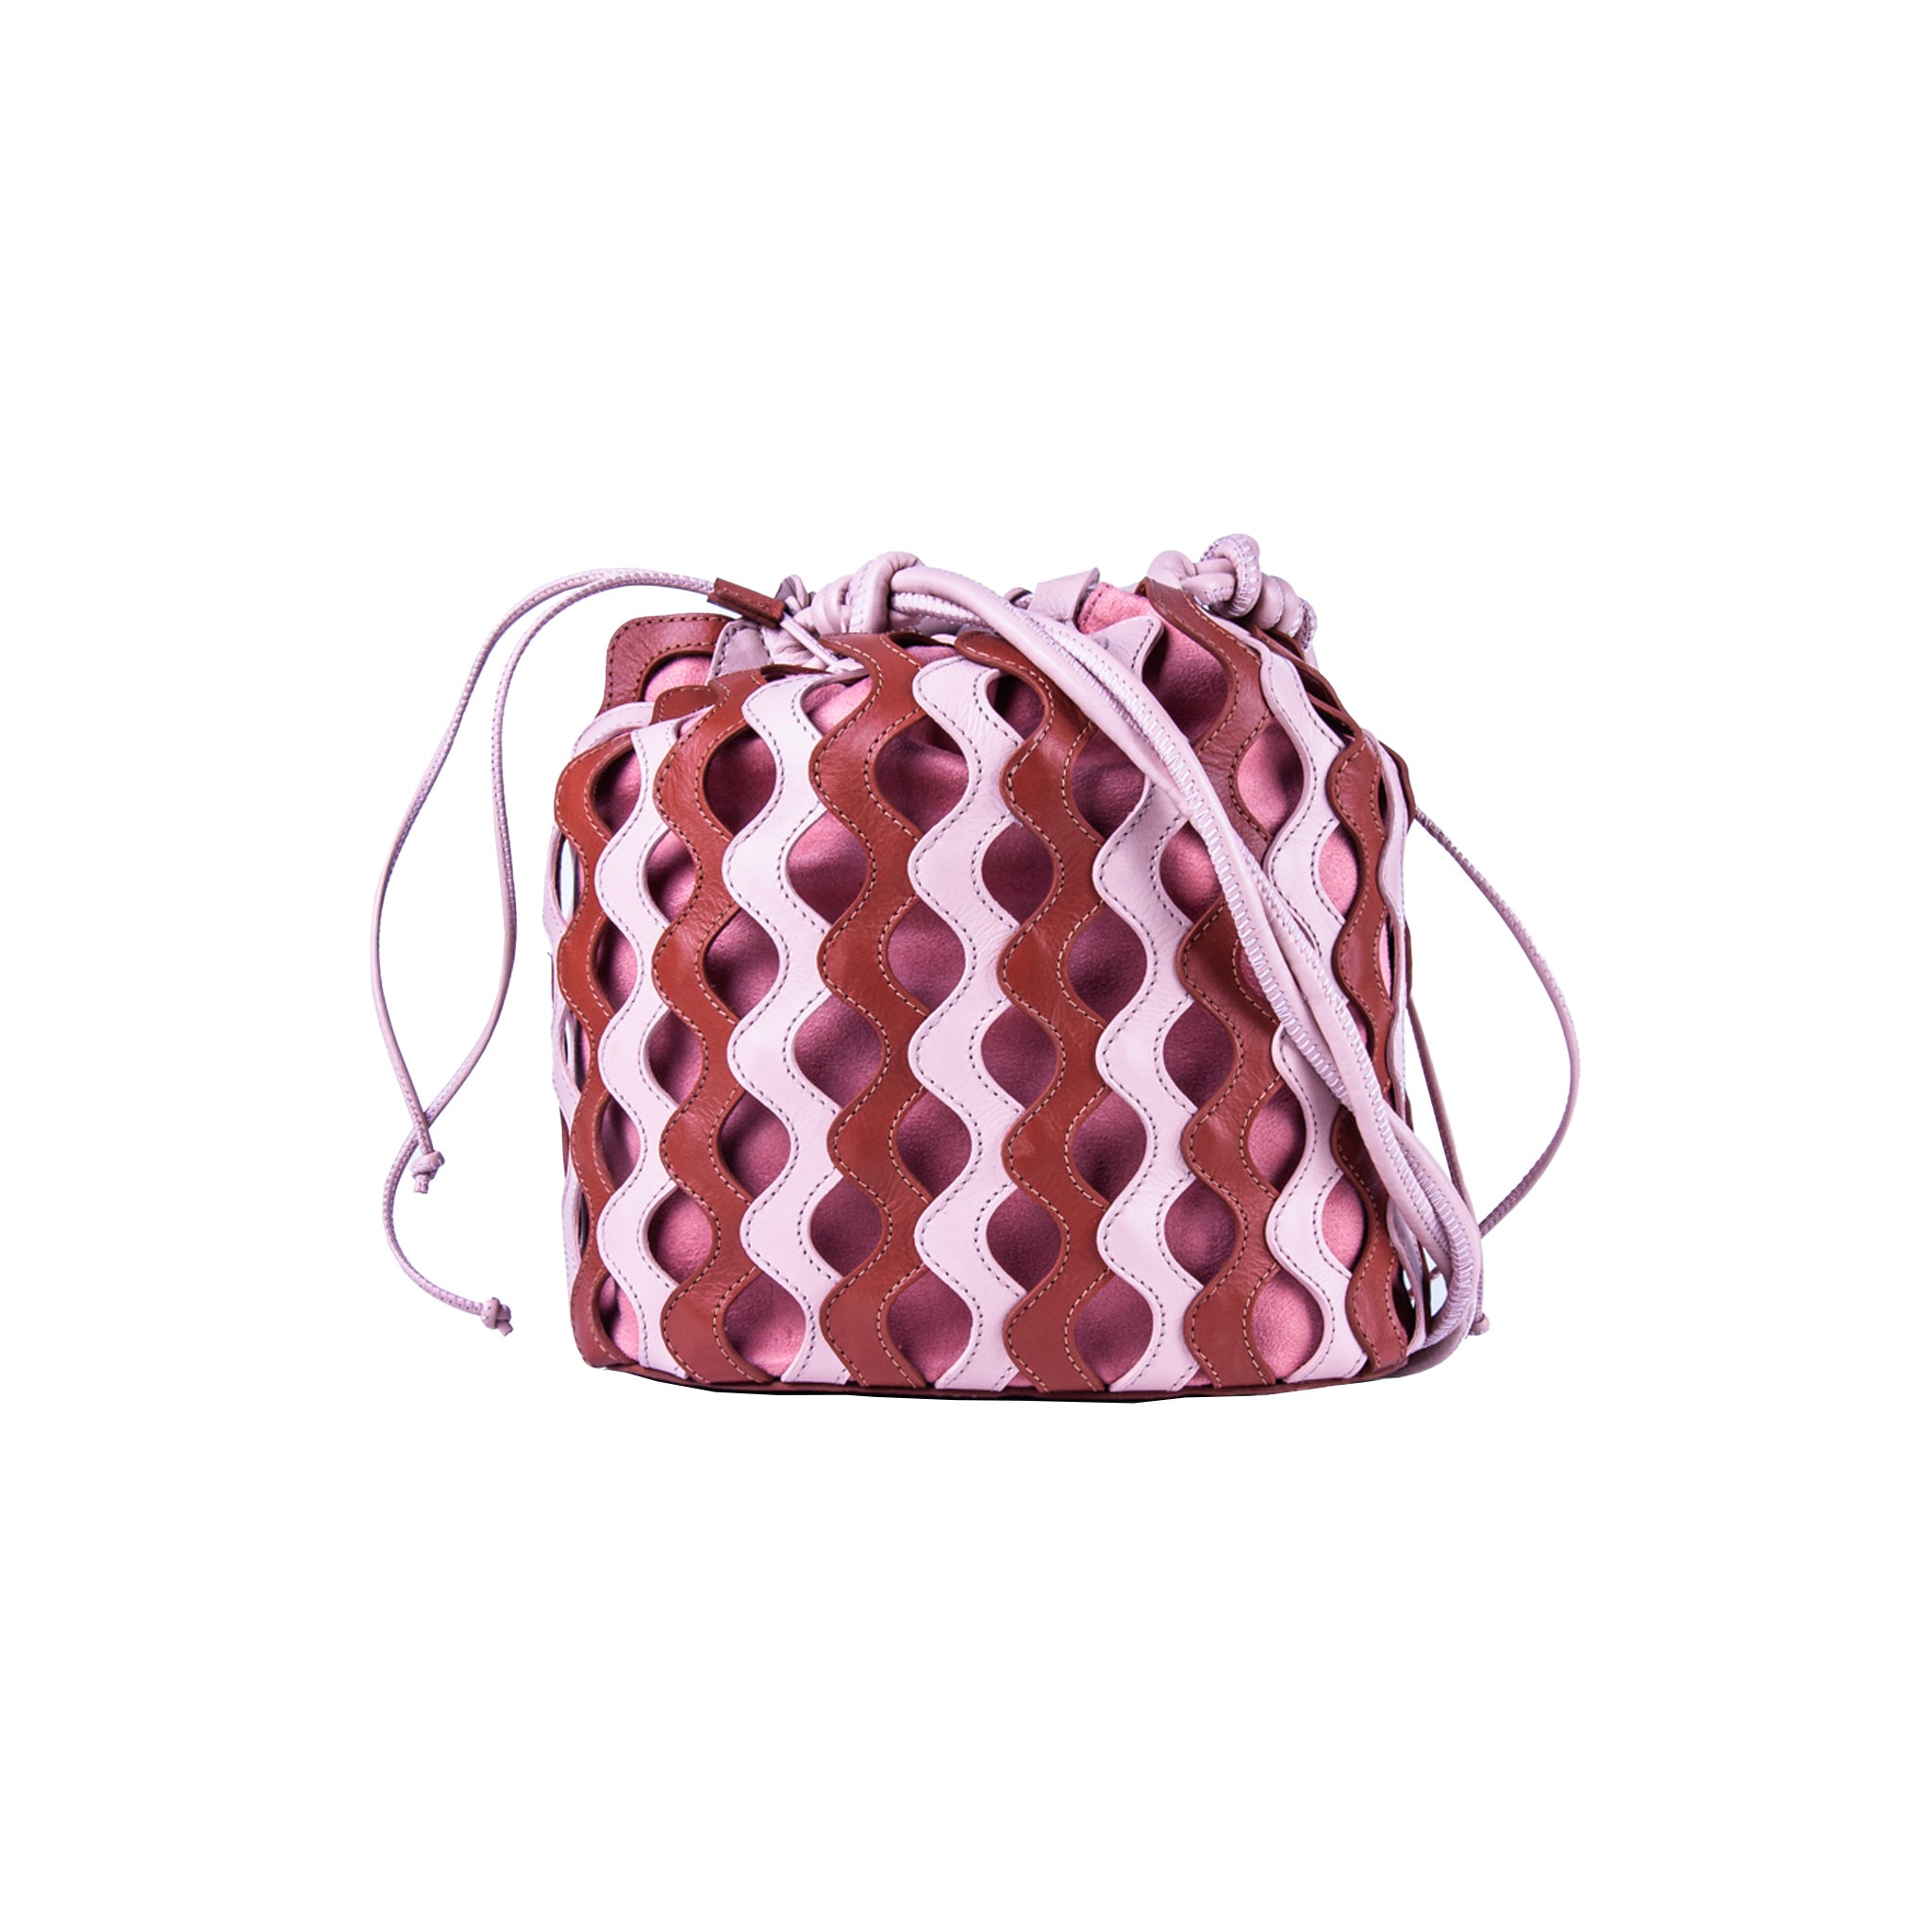 Waves Leather Bucket in Bonfire and Dustypink